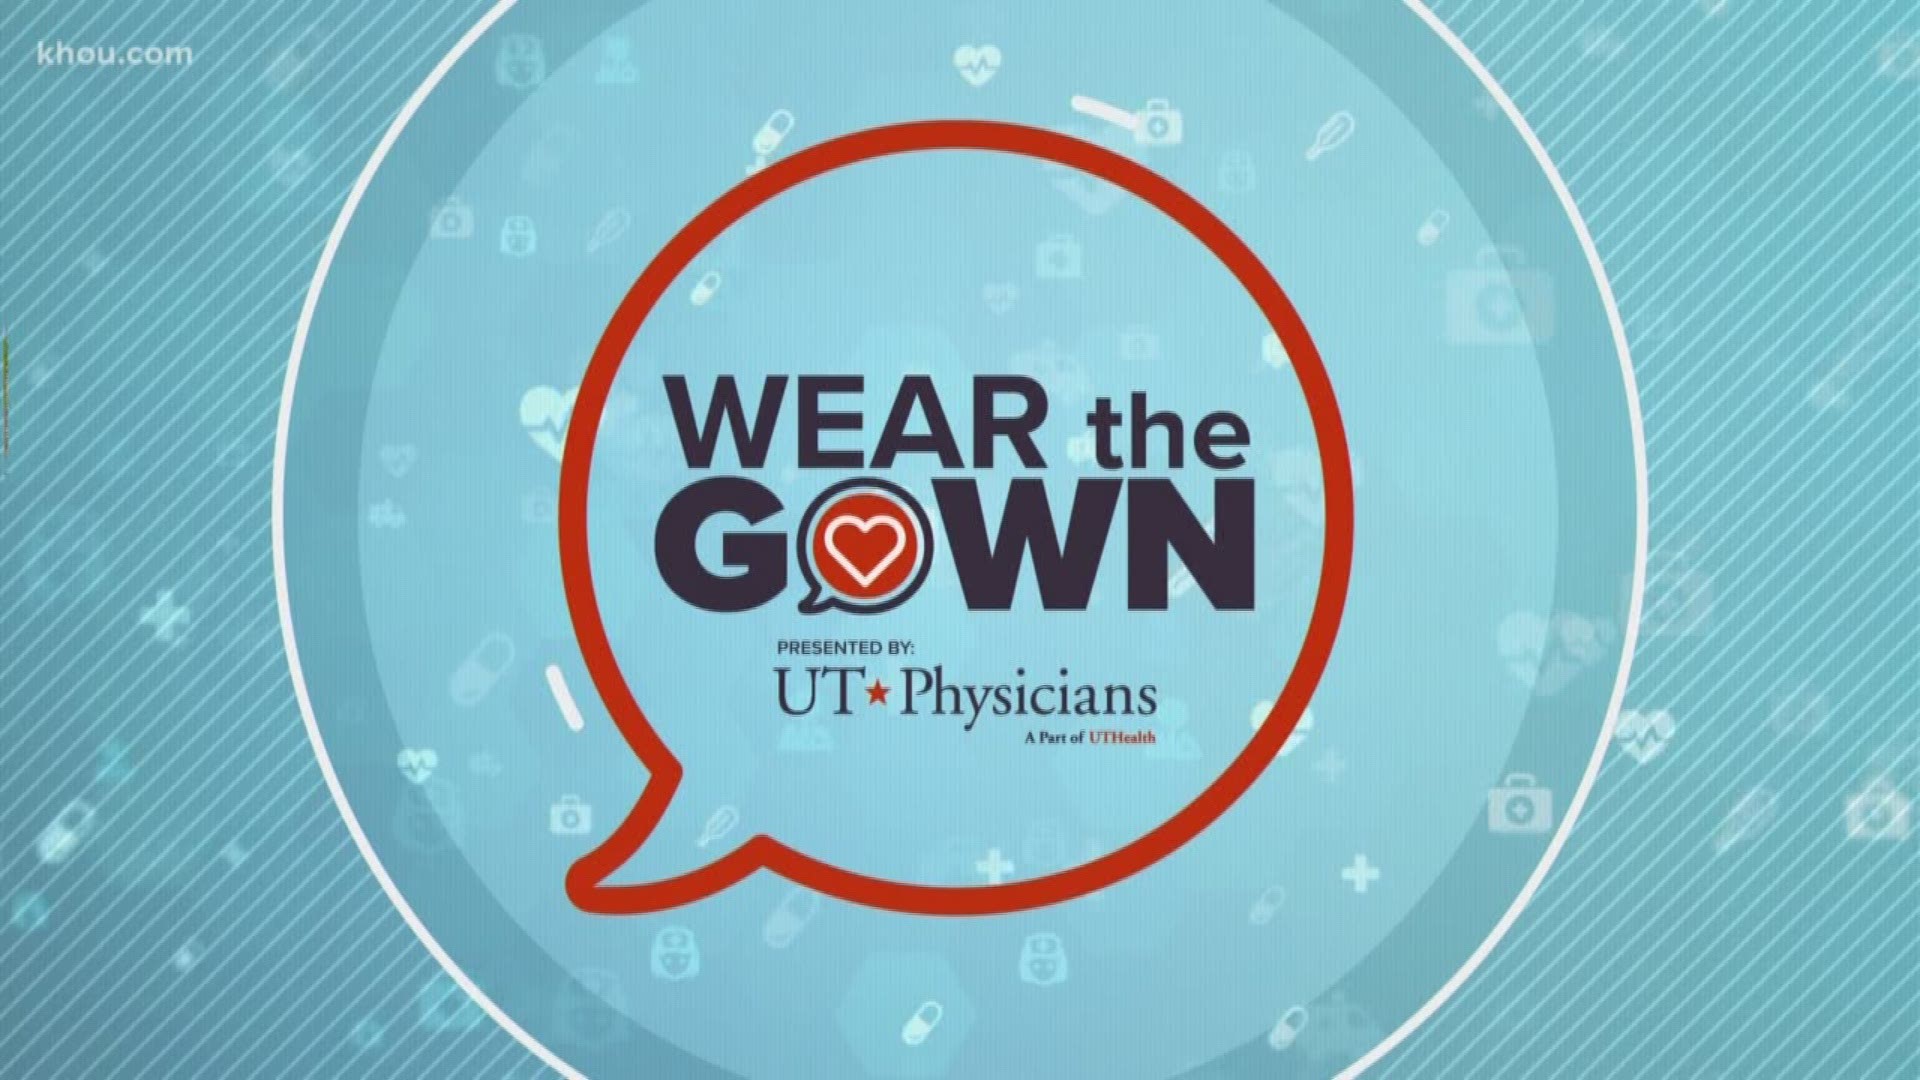 Do you know what vaccines are recommended for your child?  KHOU.com/WearTheGown